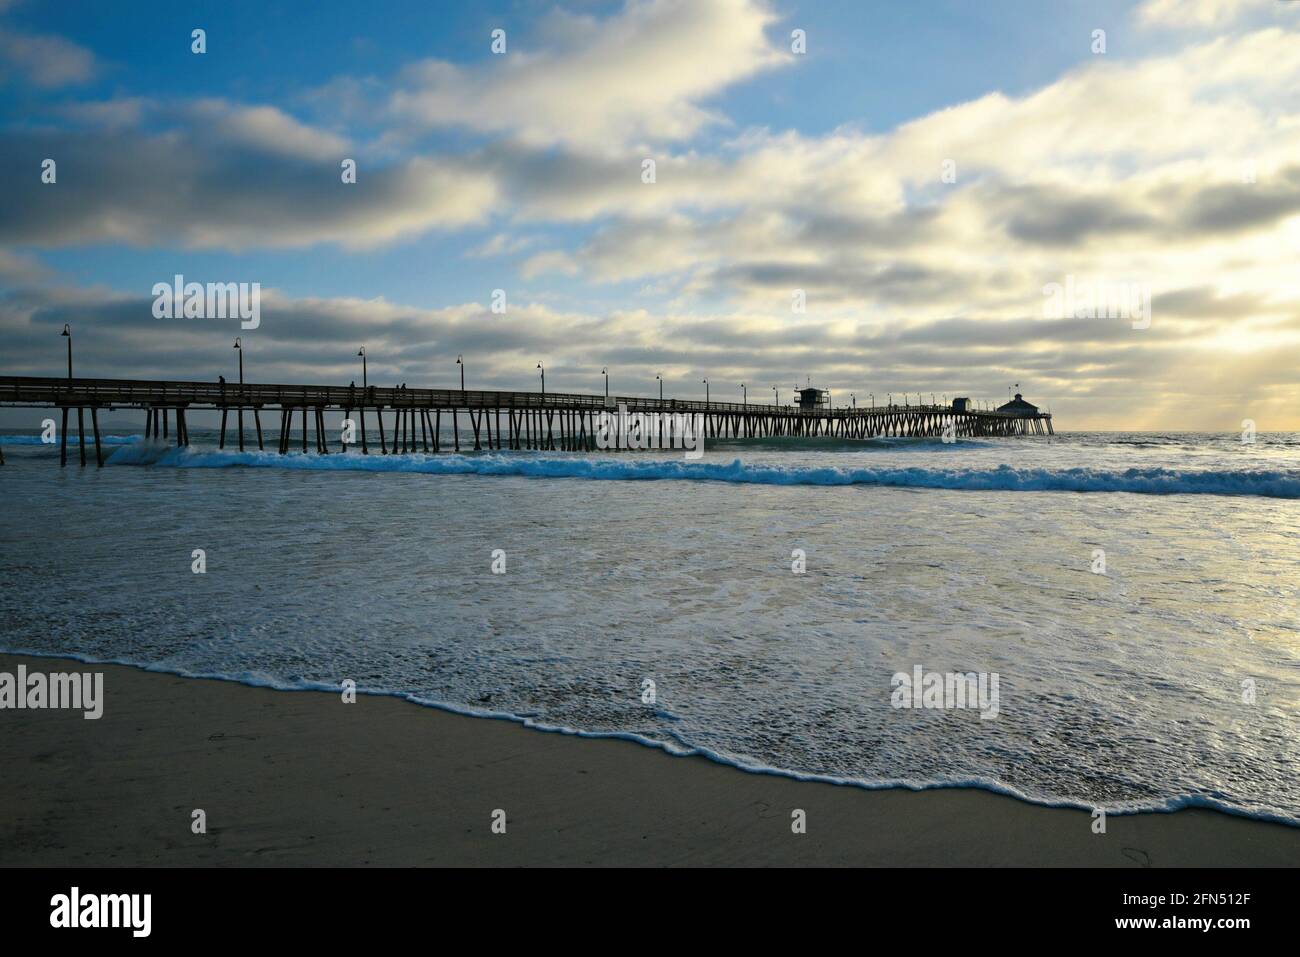 Cloudy day seascape with panoramic view of Imperial Beach Pier and the Tin Fish Restaurant in San Diego, California USA. Stock Photo